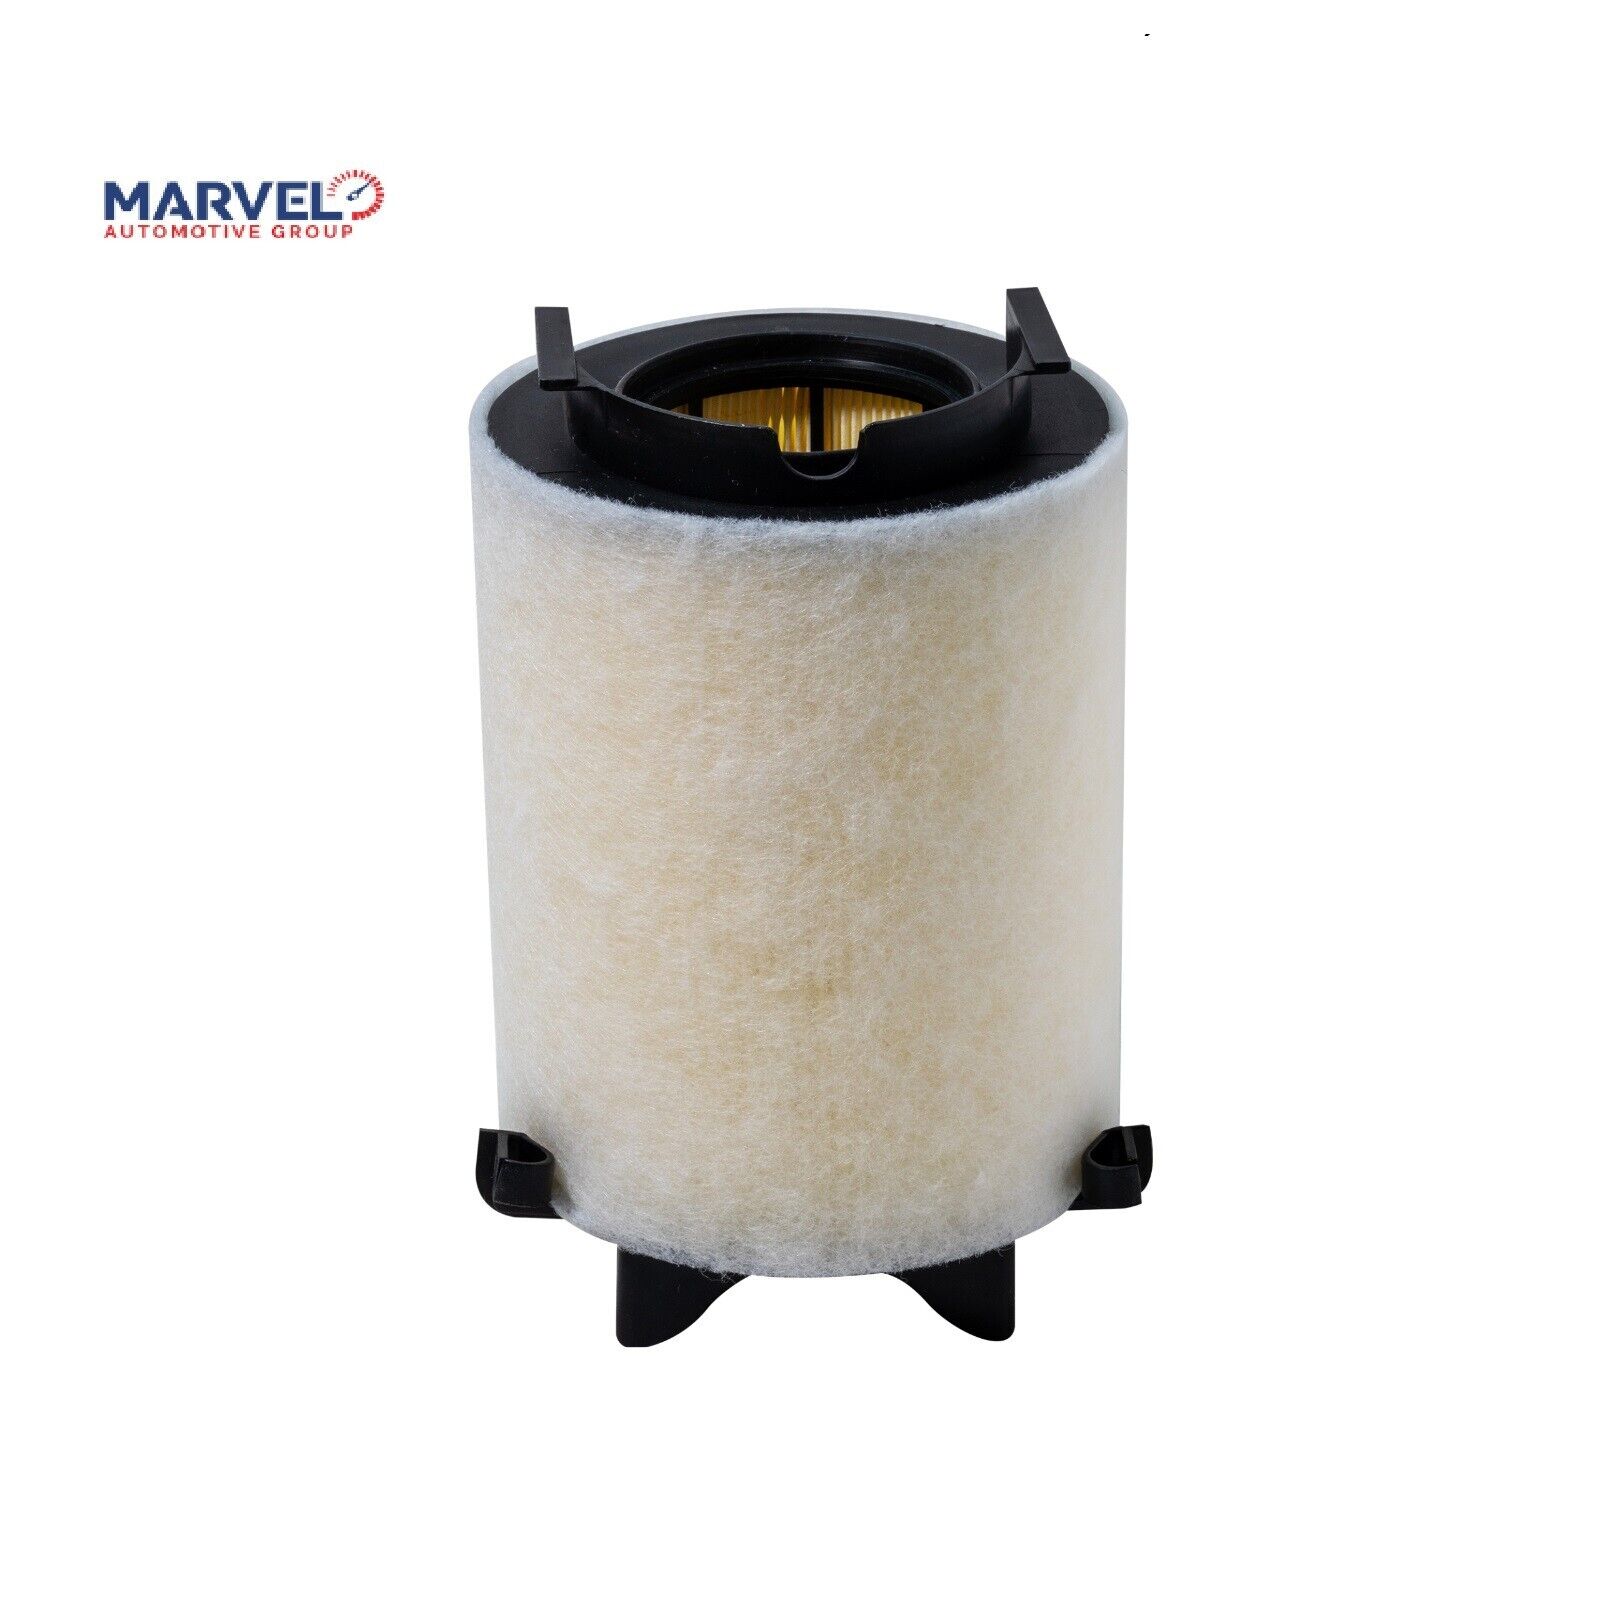 Marvel Engine Air Filter MRA3611 (1F0-129-620) for Audi A3 2012-2008 1.4L